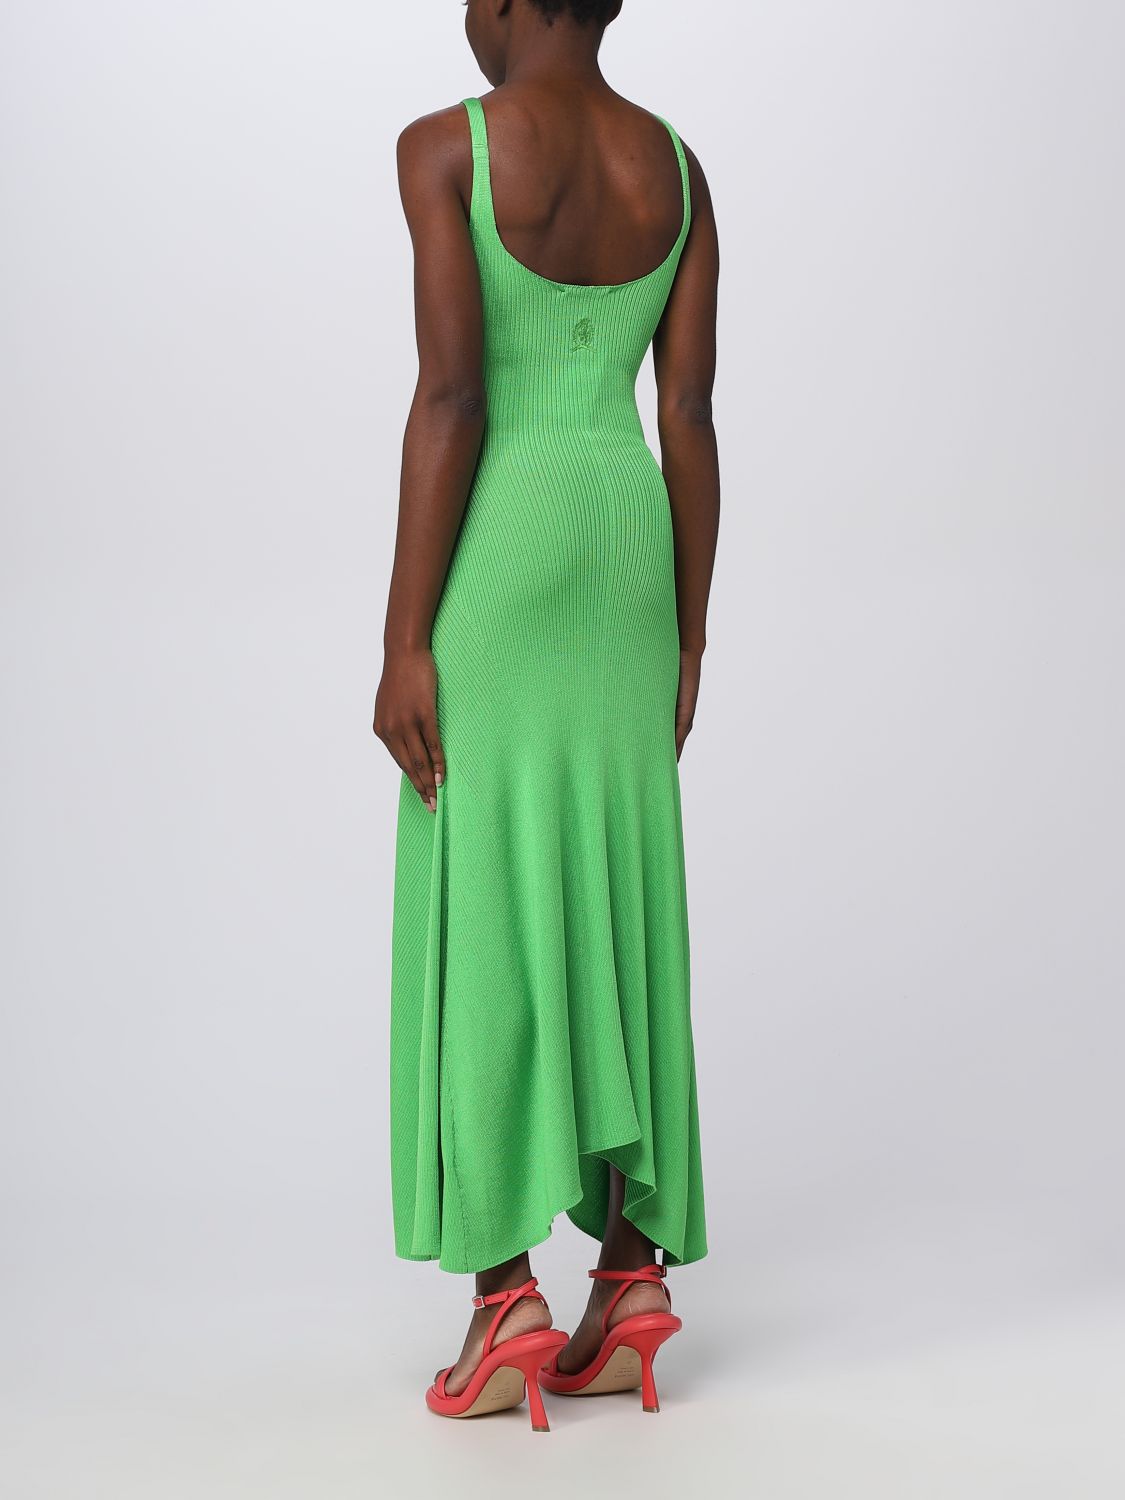 TOMMY HILFIGER COLLECTION: dress for woman - Green | Tommy Hilfiger ...